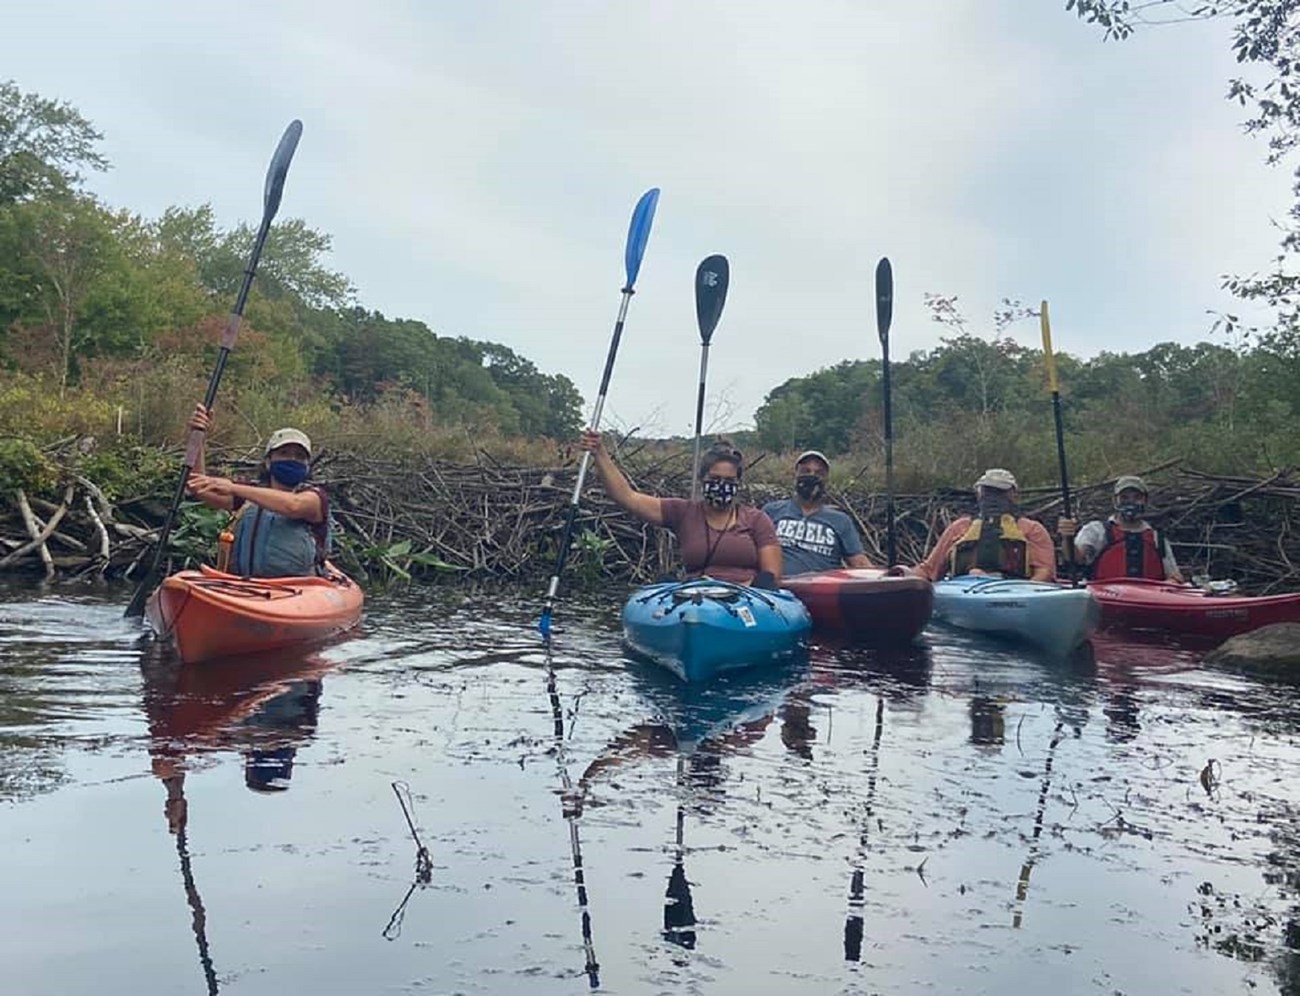 Bill McCusker, the South Kingstown Representative on the Stewardship Council,  and Elise Torello, his wife and consultant for the Wood-Pawcatuck Watershed Association, connected with leadership of the South Kingstown Land Trust on the water.    Photo by B